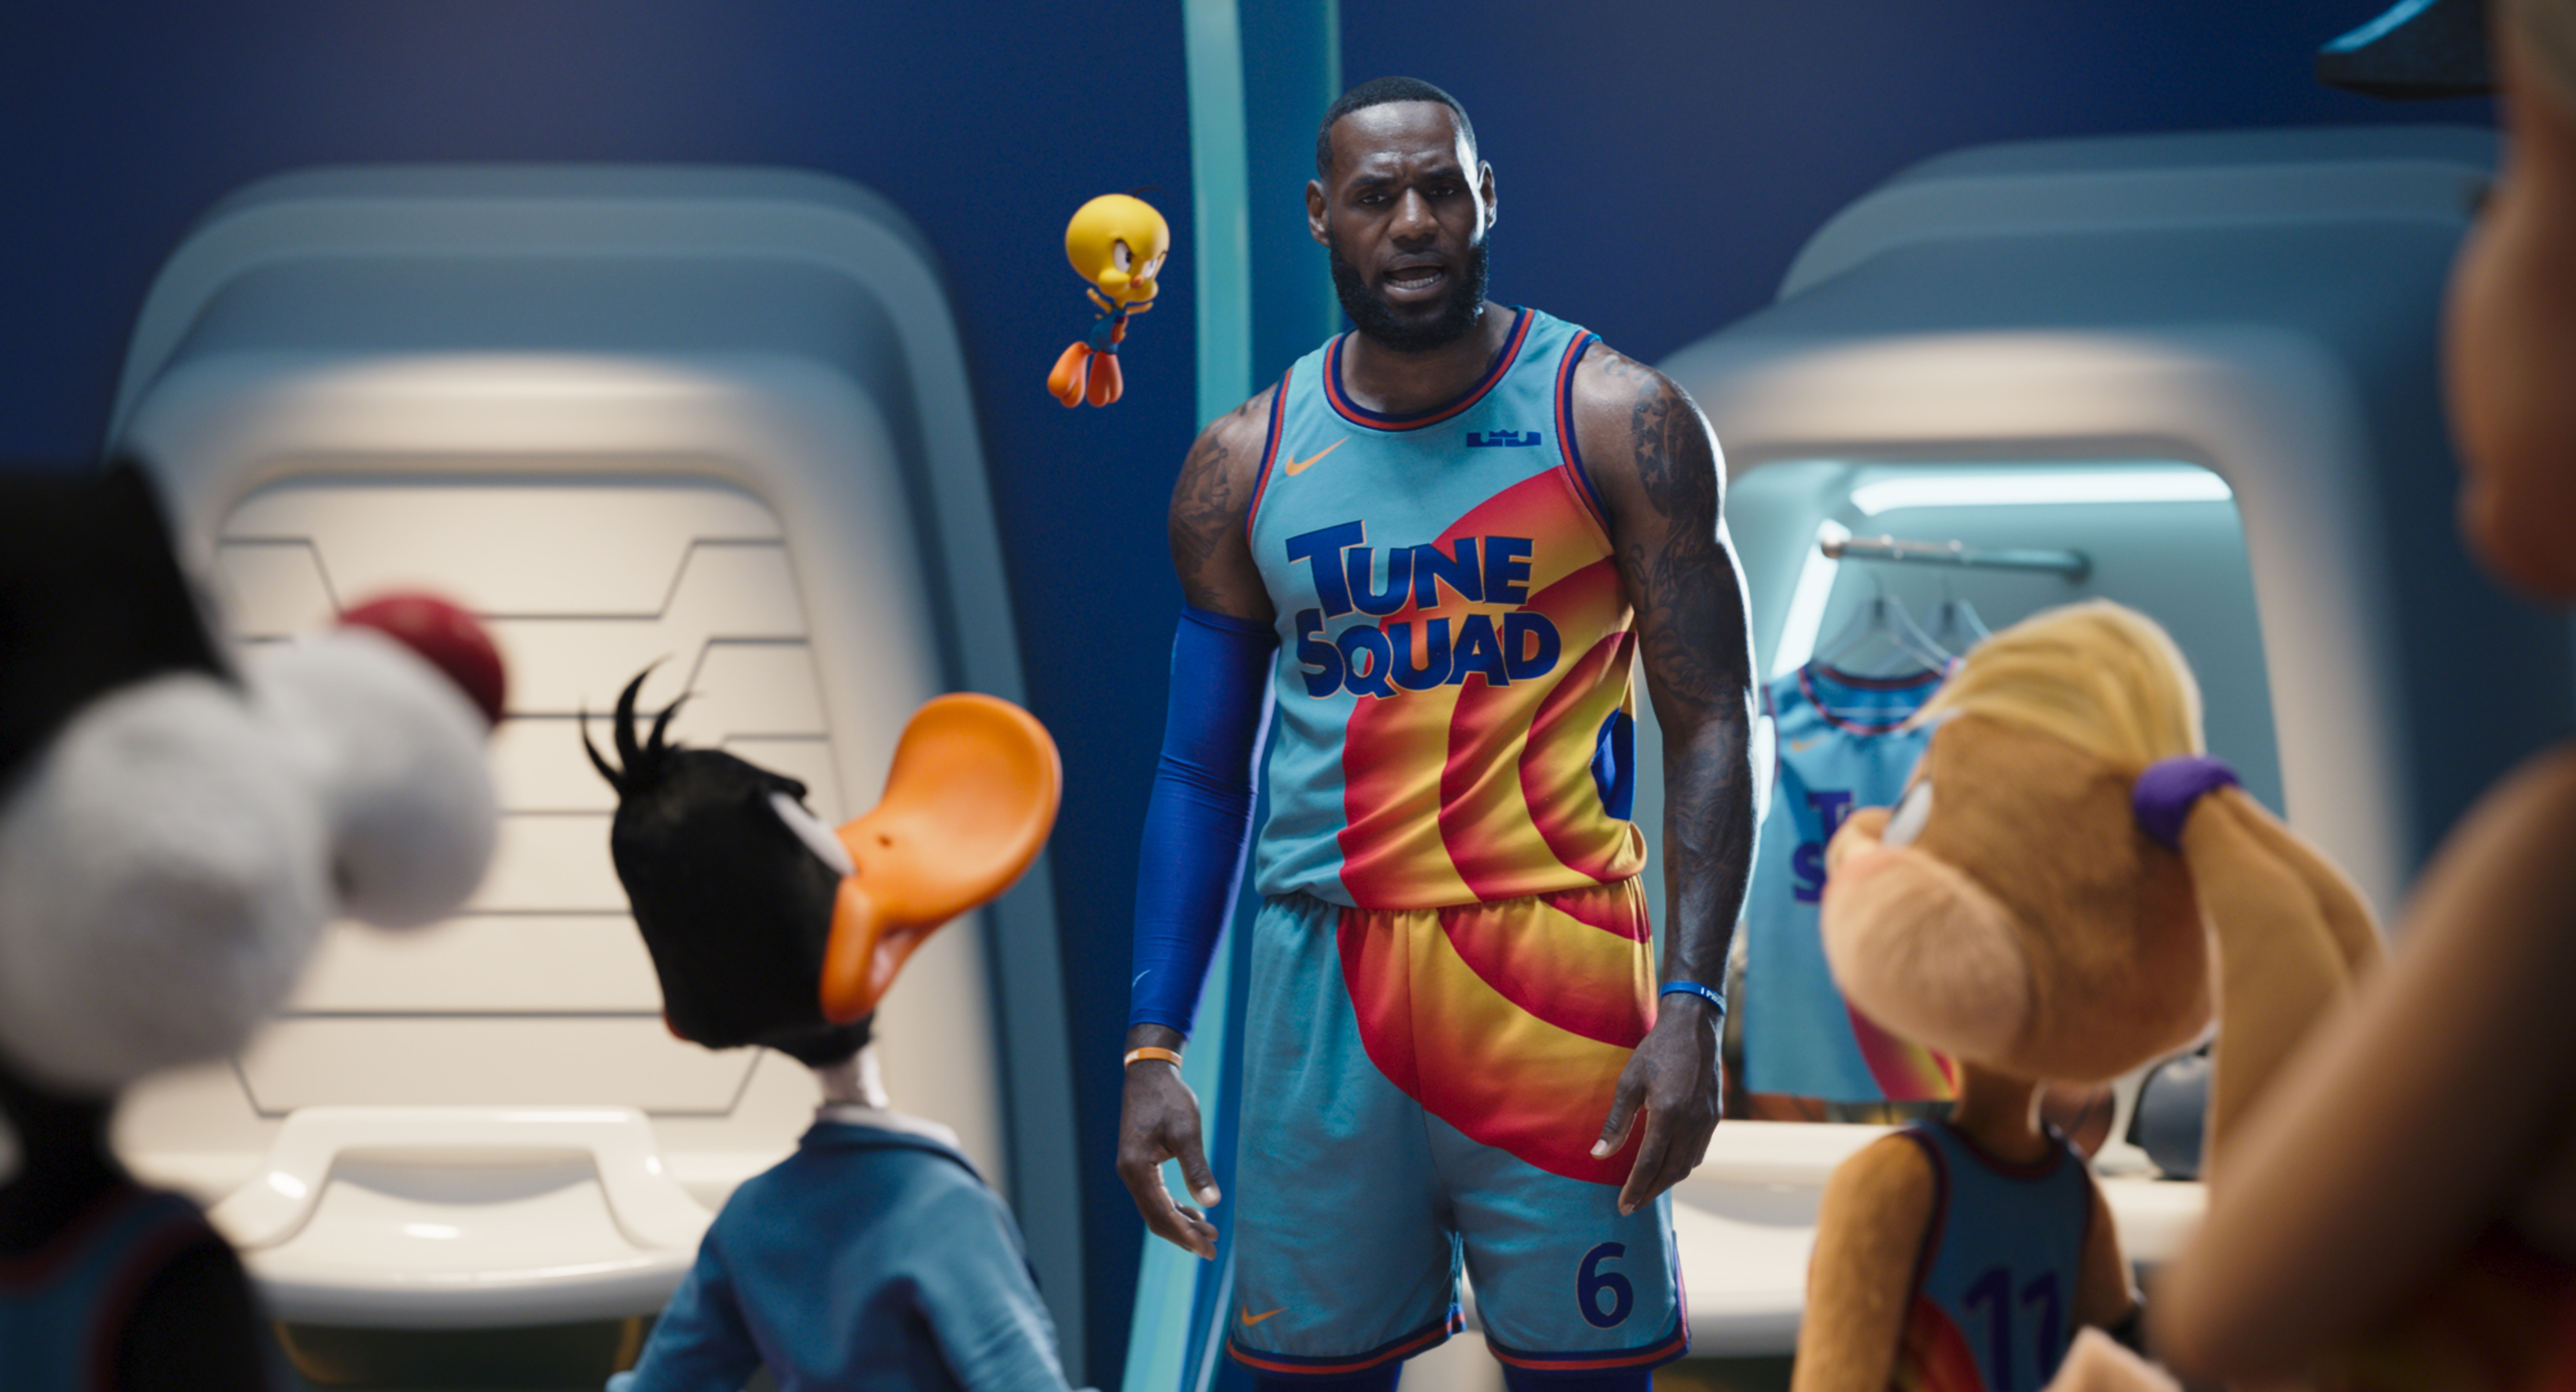 Space Jam: A New Legacy Director Says Movie Is An “Immersive